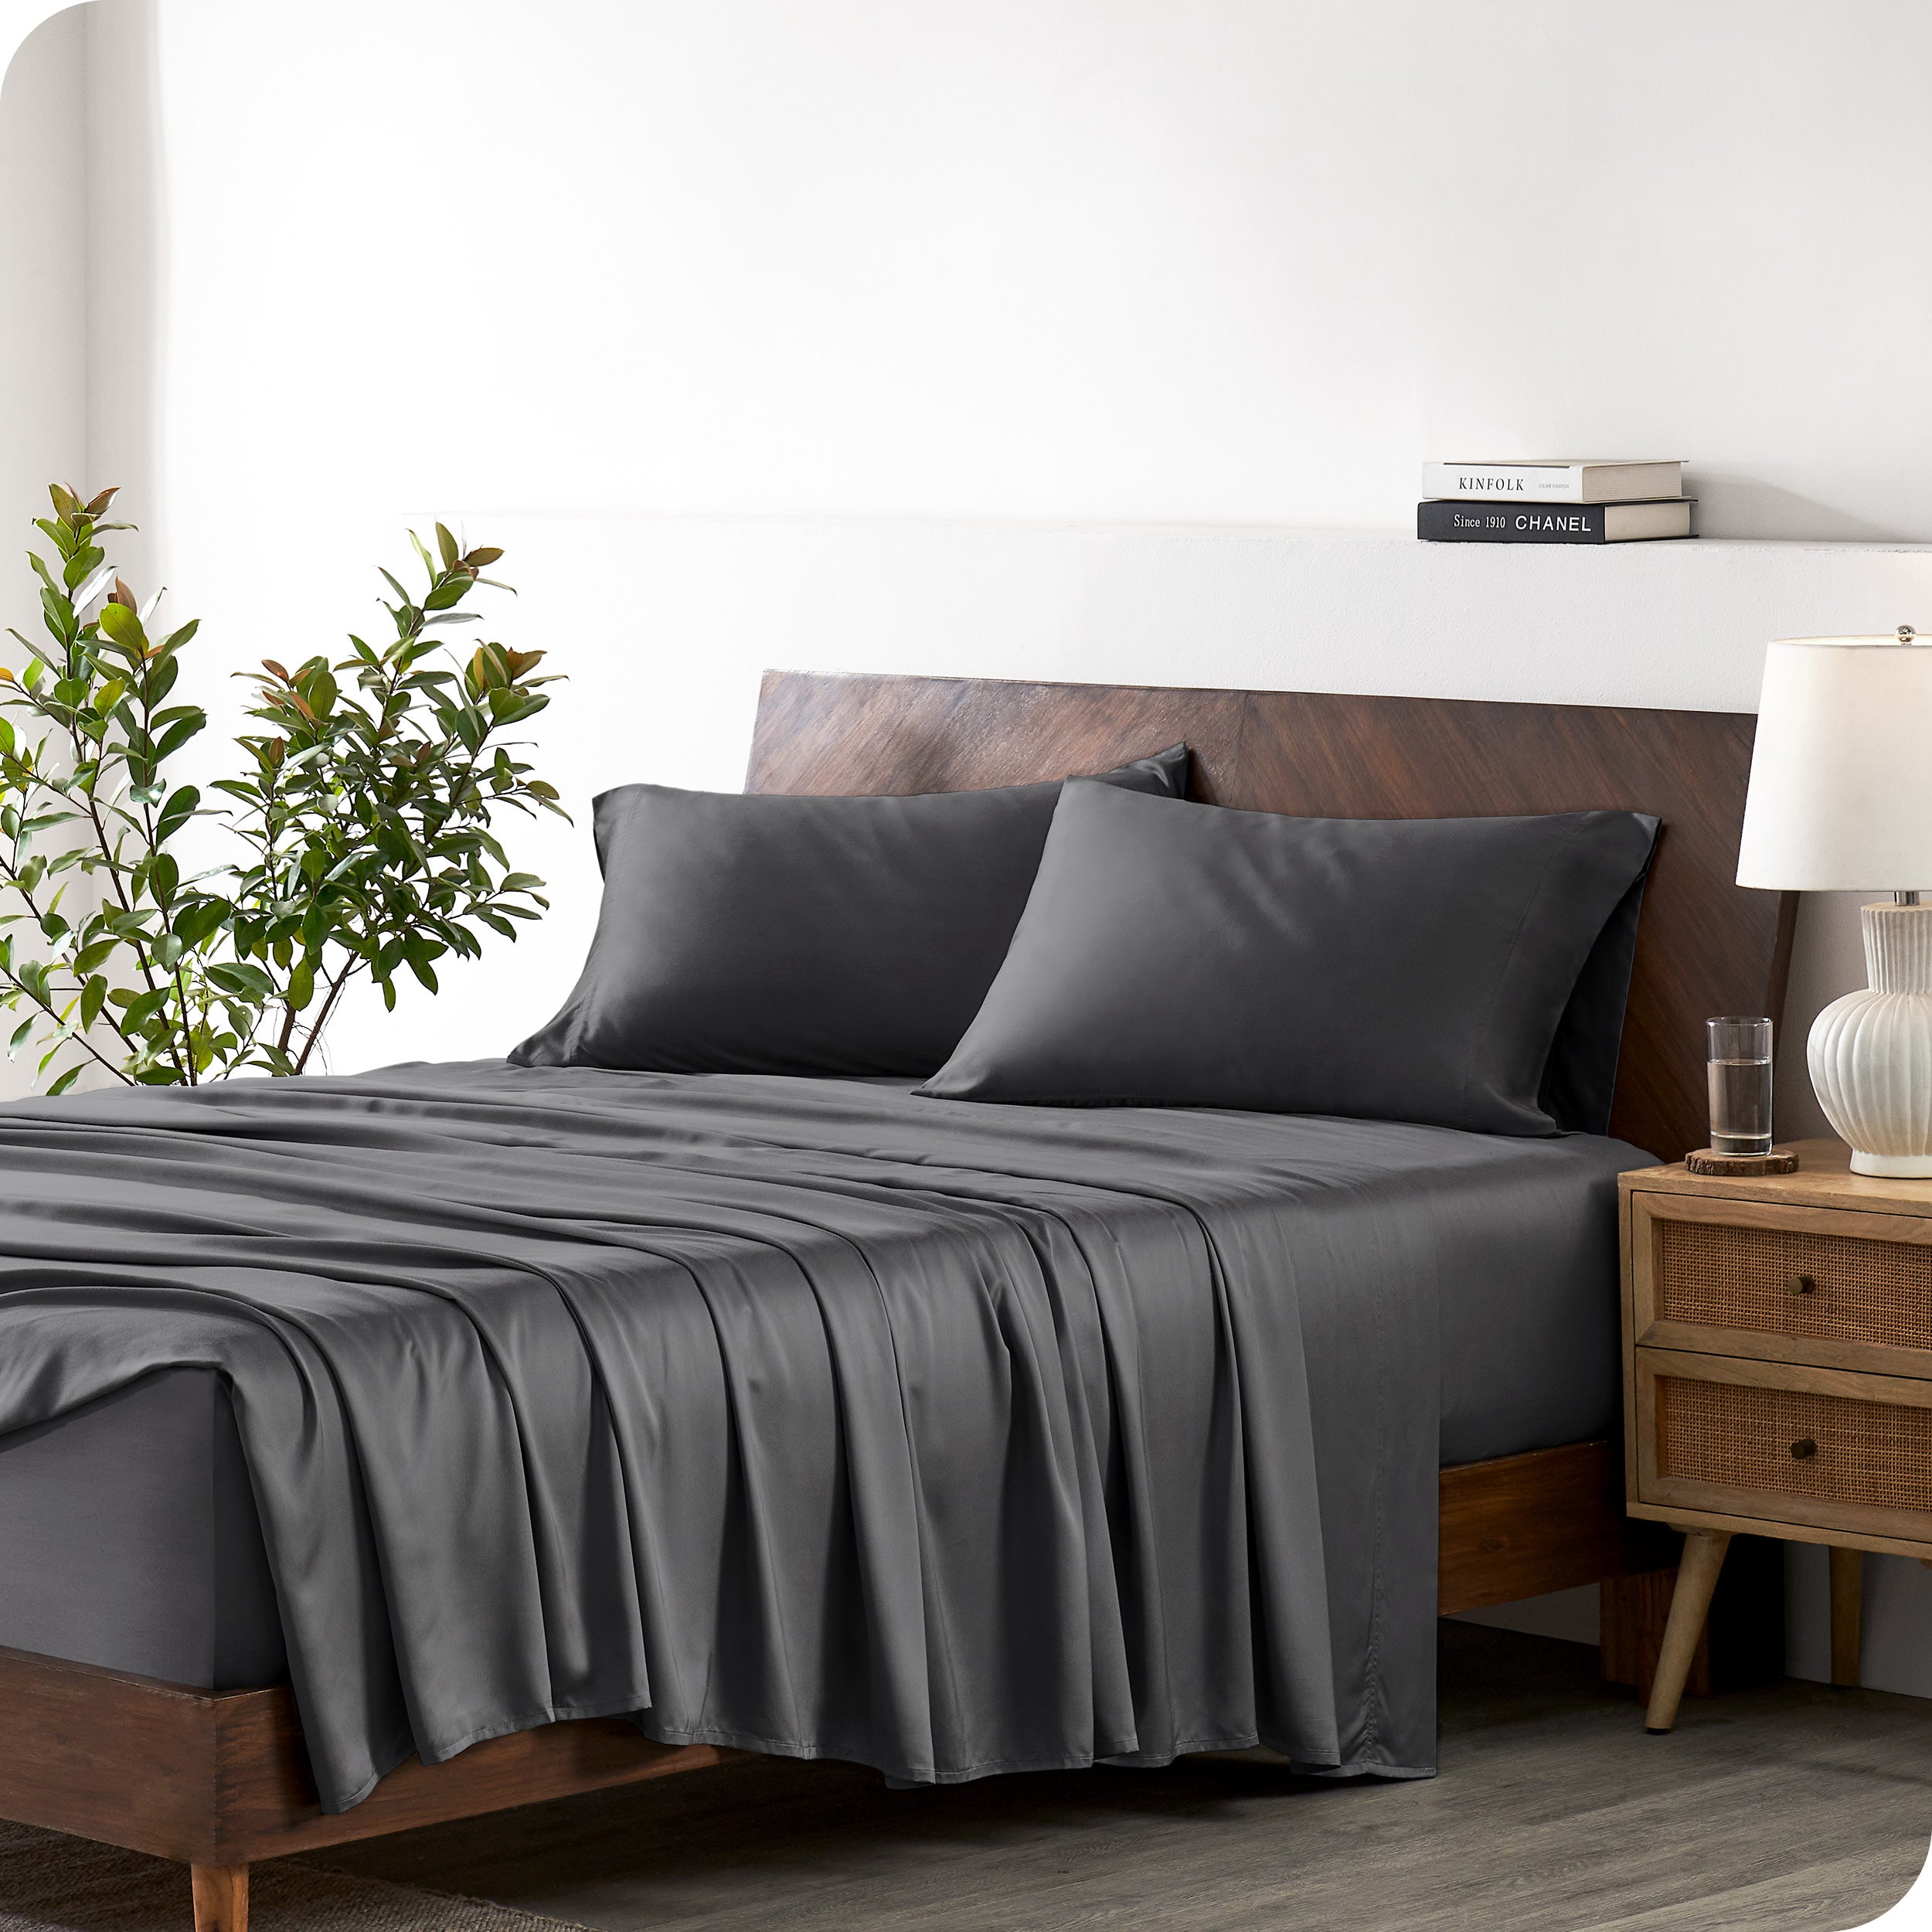 A bamboo sheet set draped over a bed with a wooden bed frame